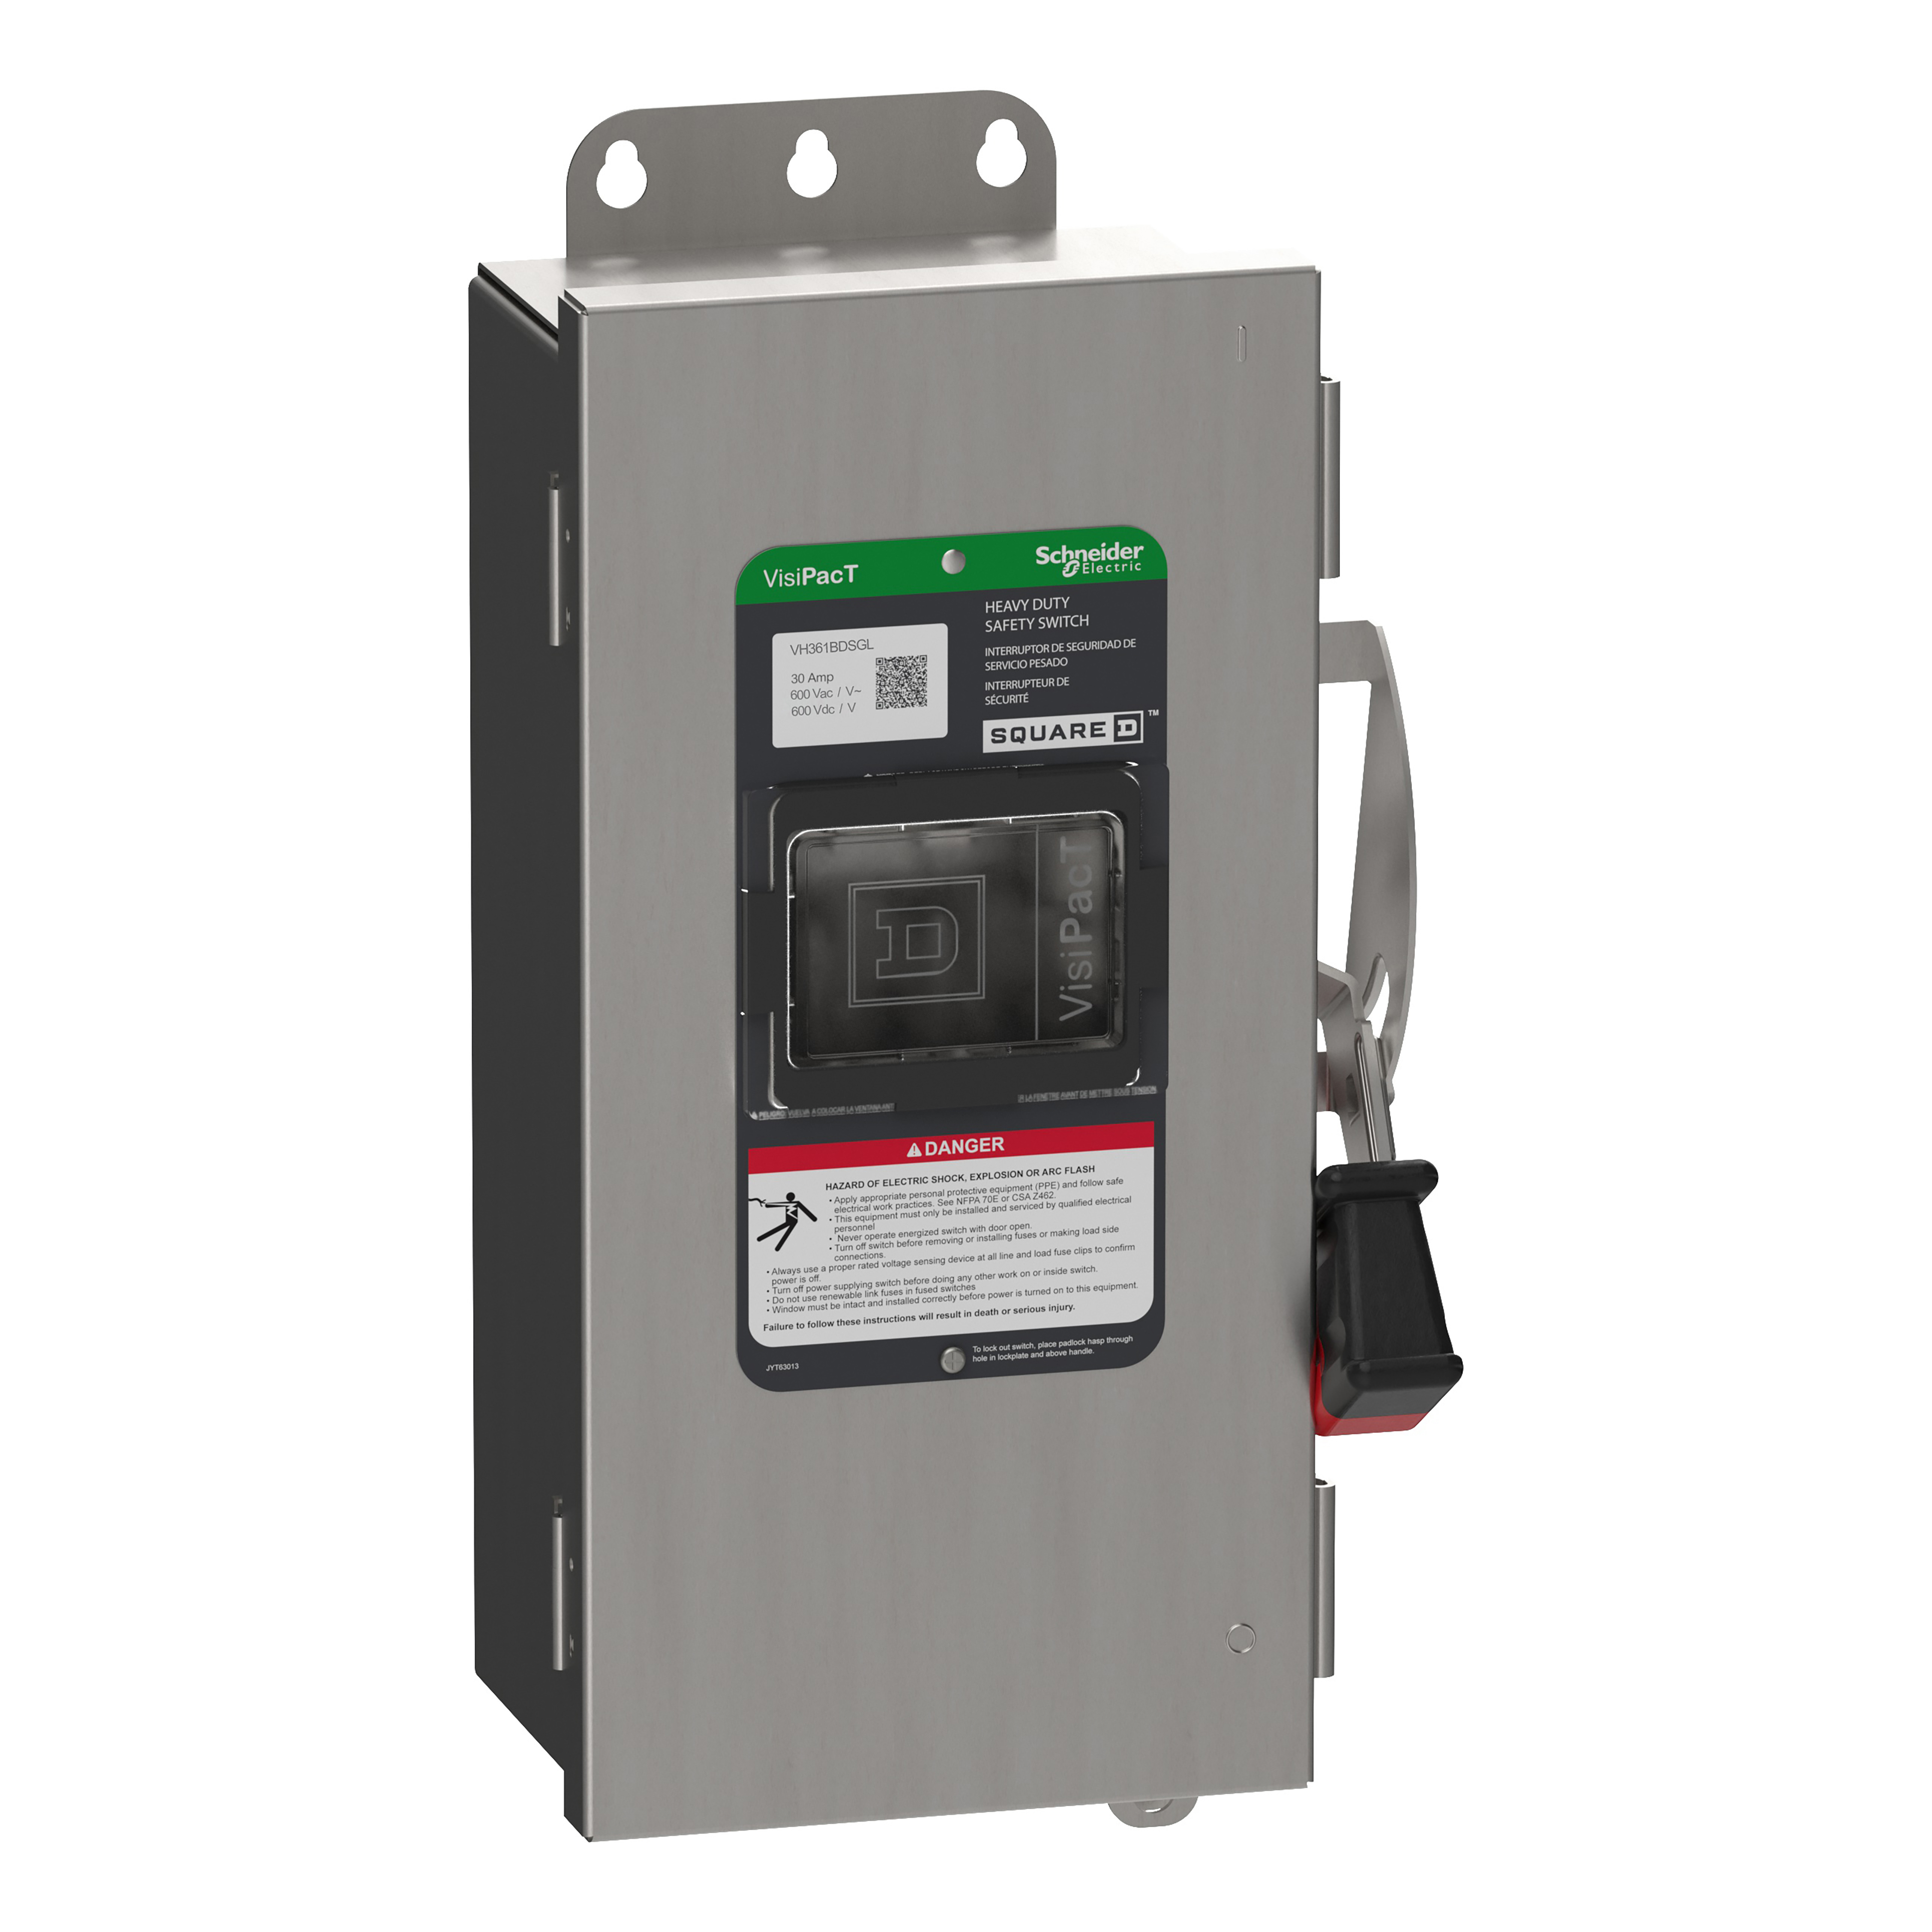 Safety switch, heavy duty, fused, viewing window, Type 4X, 600V, 30A, 3 pole, neutral installed, ground lugs